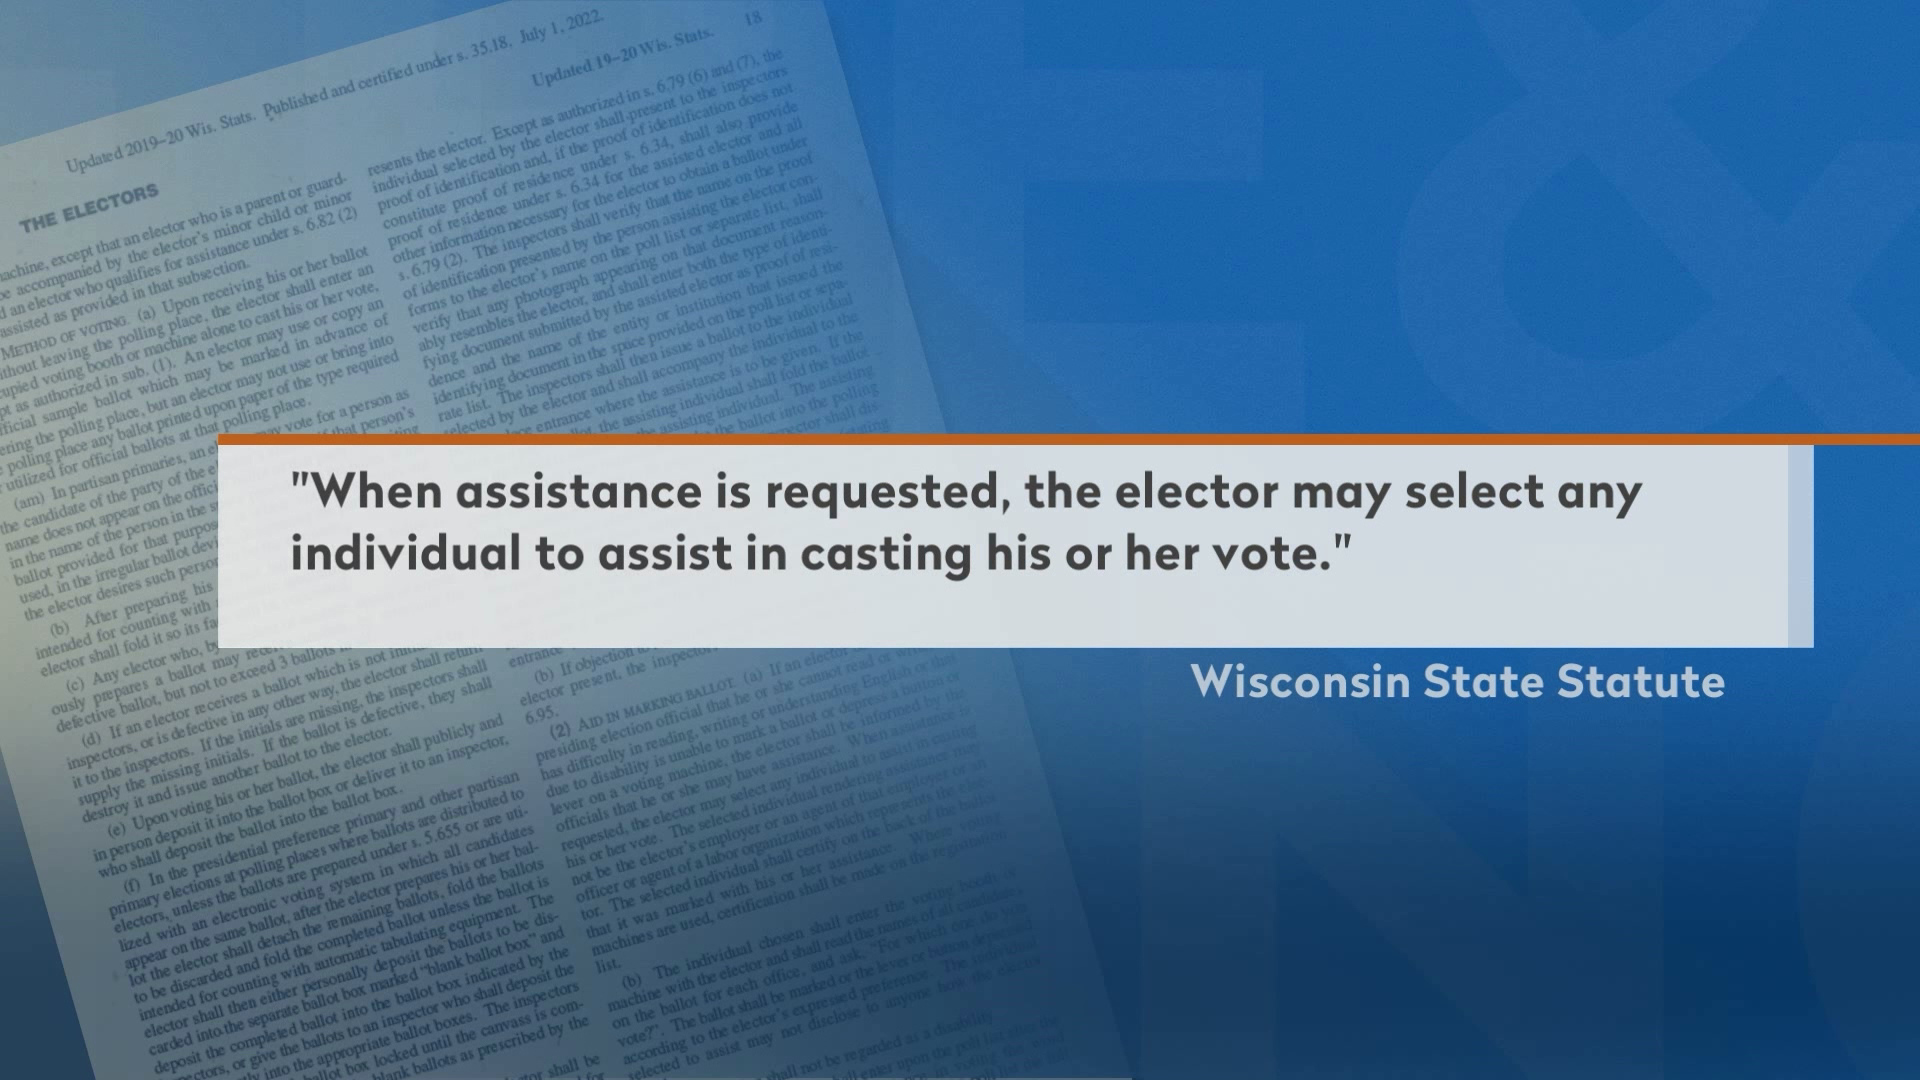 A text graphic reads "When assistance is requested, the elector may select any individual to assist in casting his or her vote" and is attributed to Wisconsin State Statute.